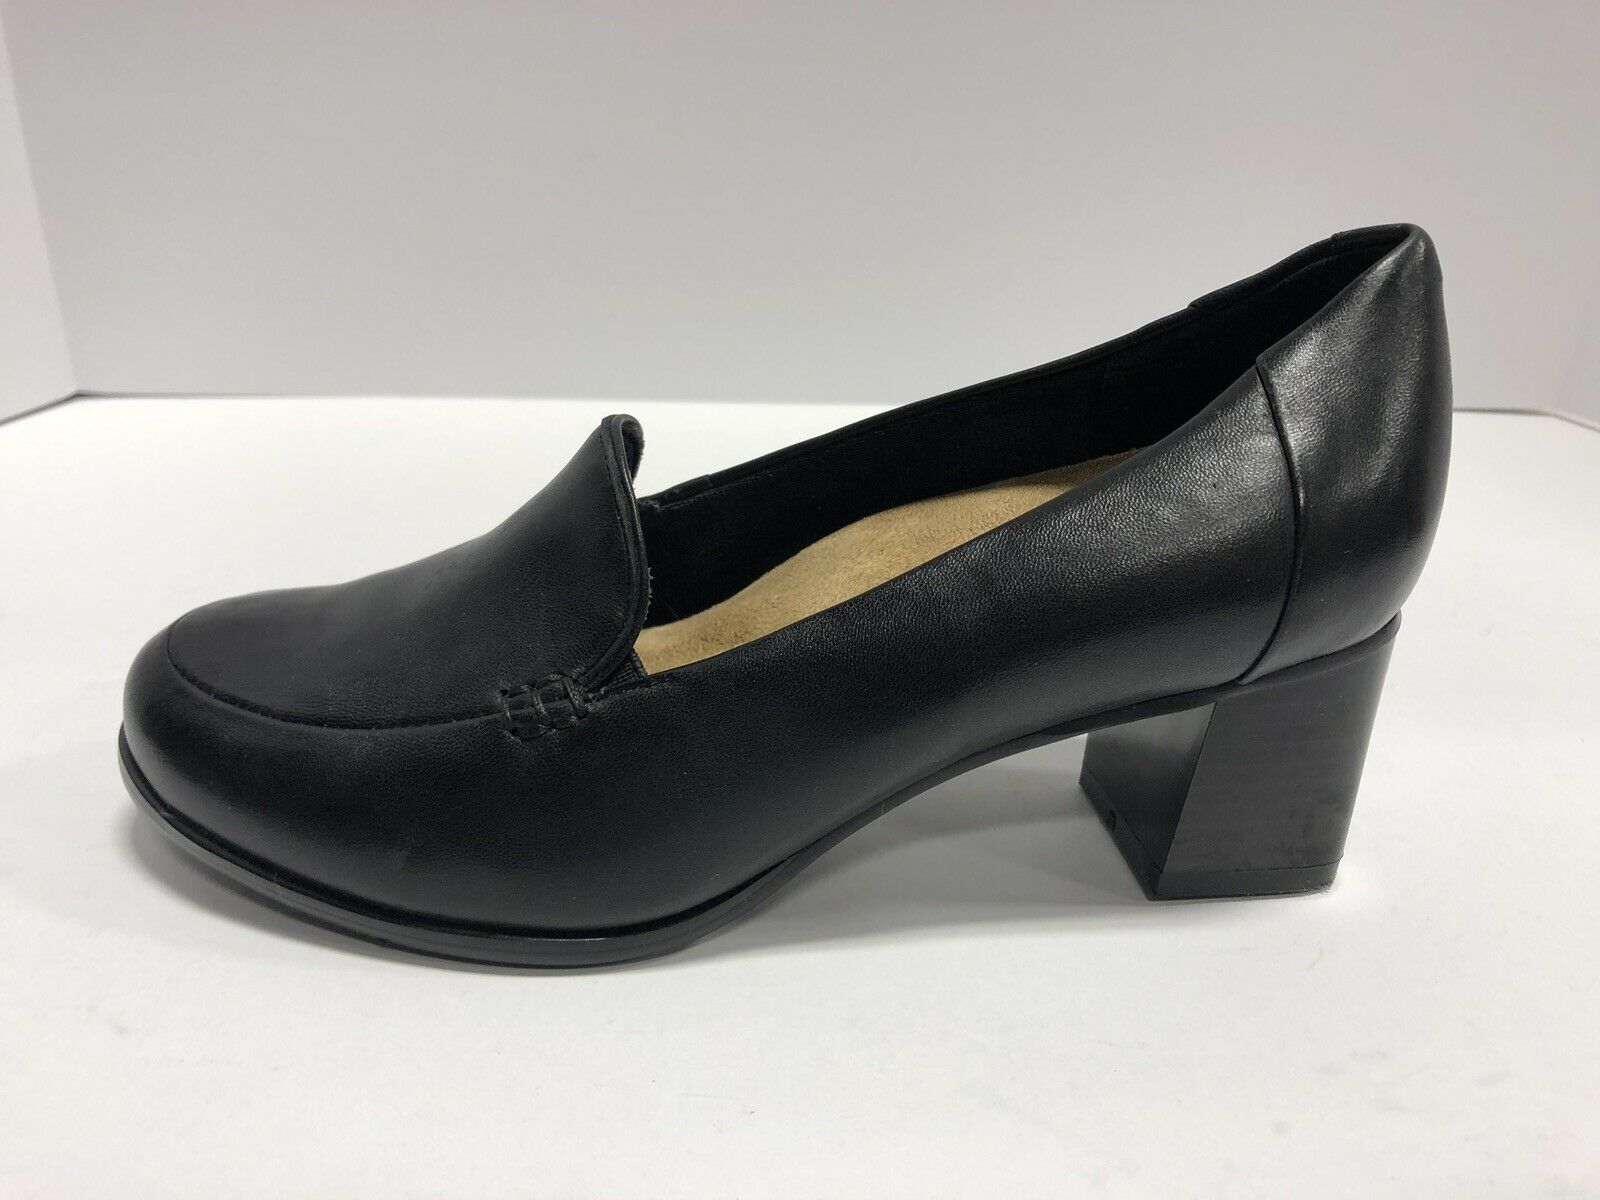 Trotters Quincy Black Leather High Heel Pumps/Dress Shoes Wo’s Size 6.5 X-Wide